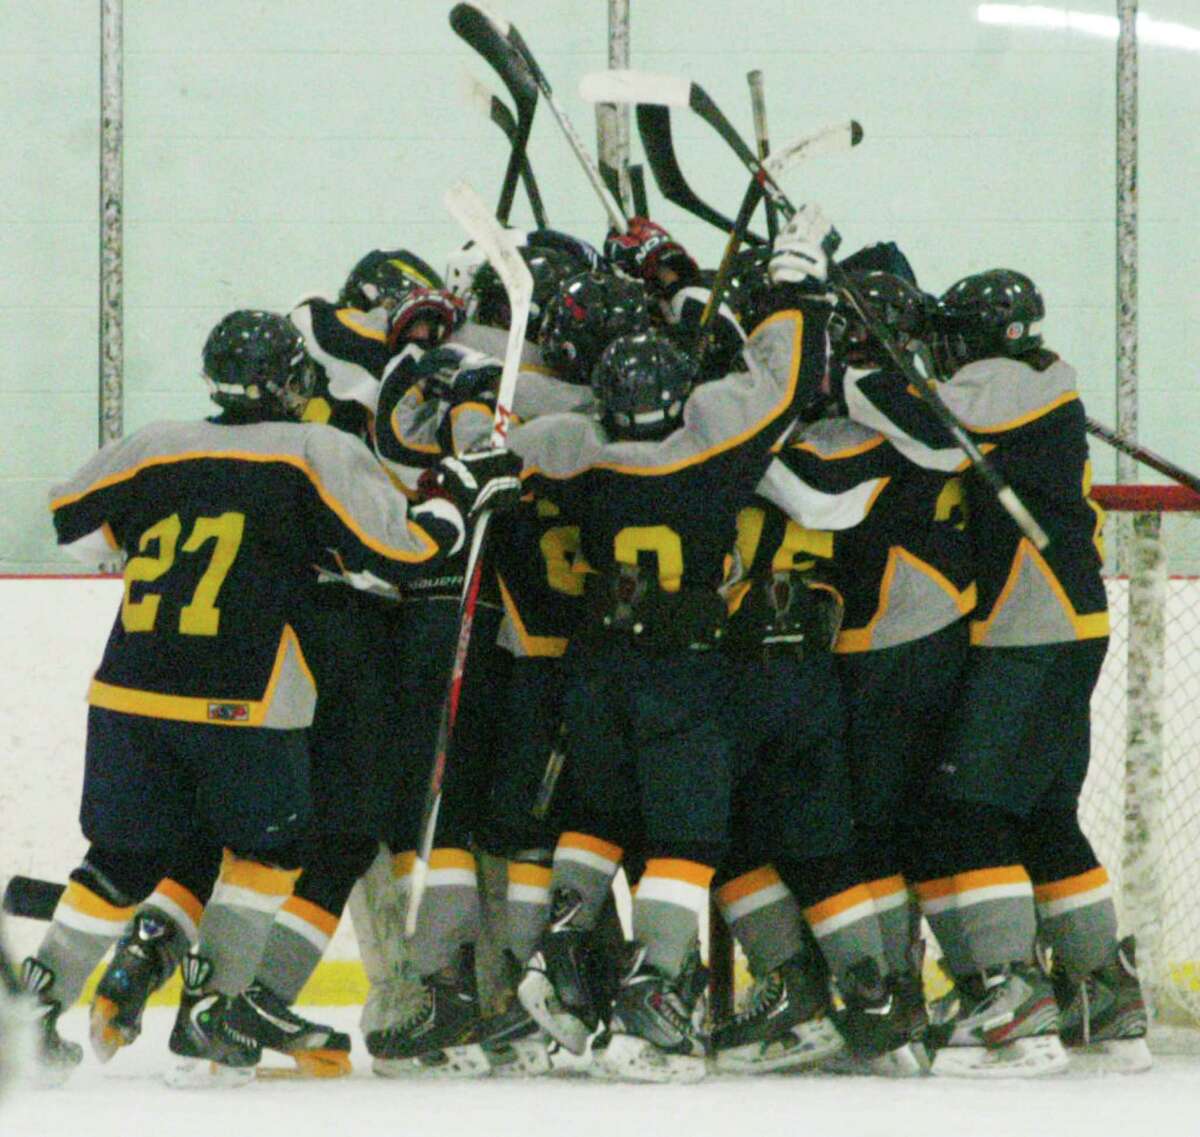 The Mountaineers celebrate victory following Shepaug Valley/Litchfield/Nonnewaug ice hockey's Senior Night defeat to arch-rival Housatonic Valley/Northwestern/Wamogo at The Gunnery in Washington, Feb. 24, 2014.